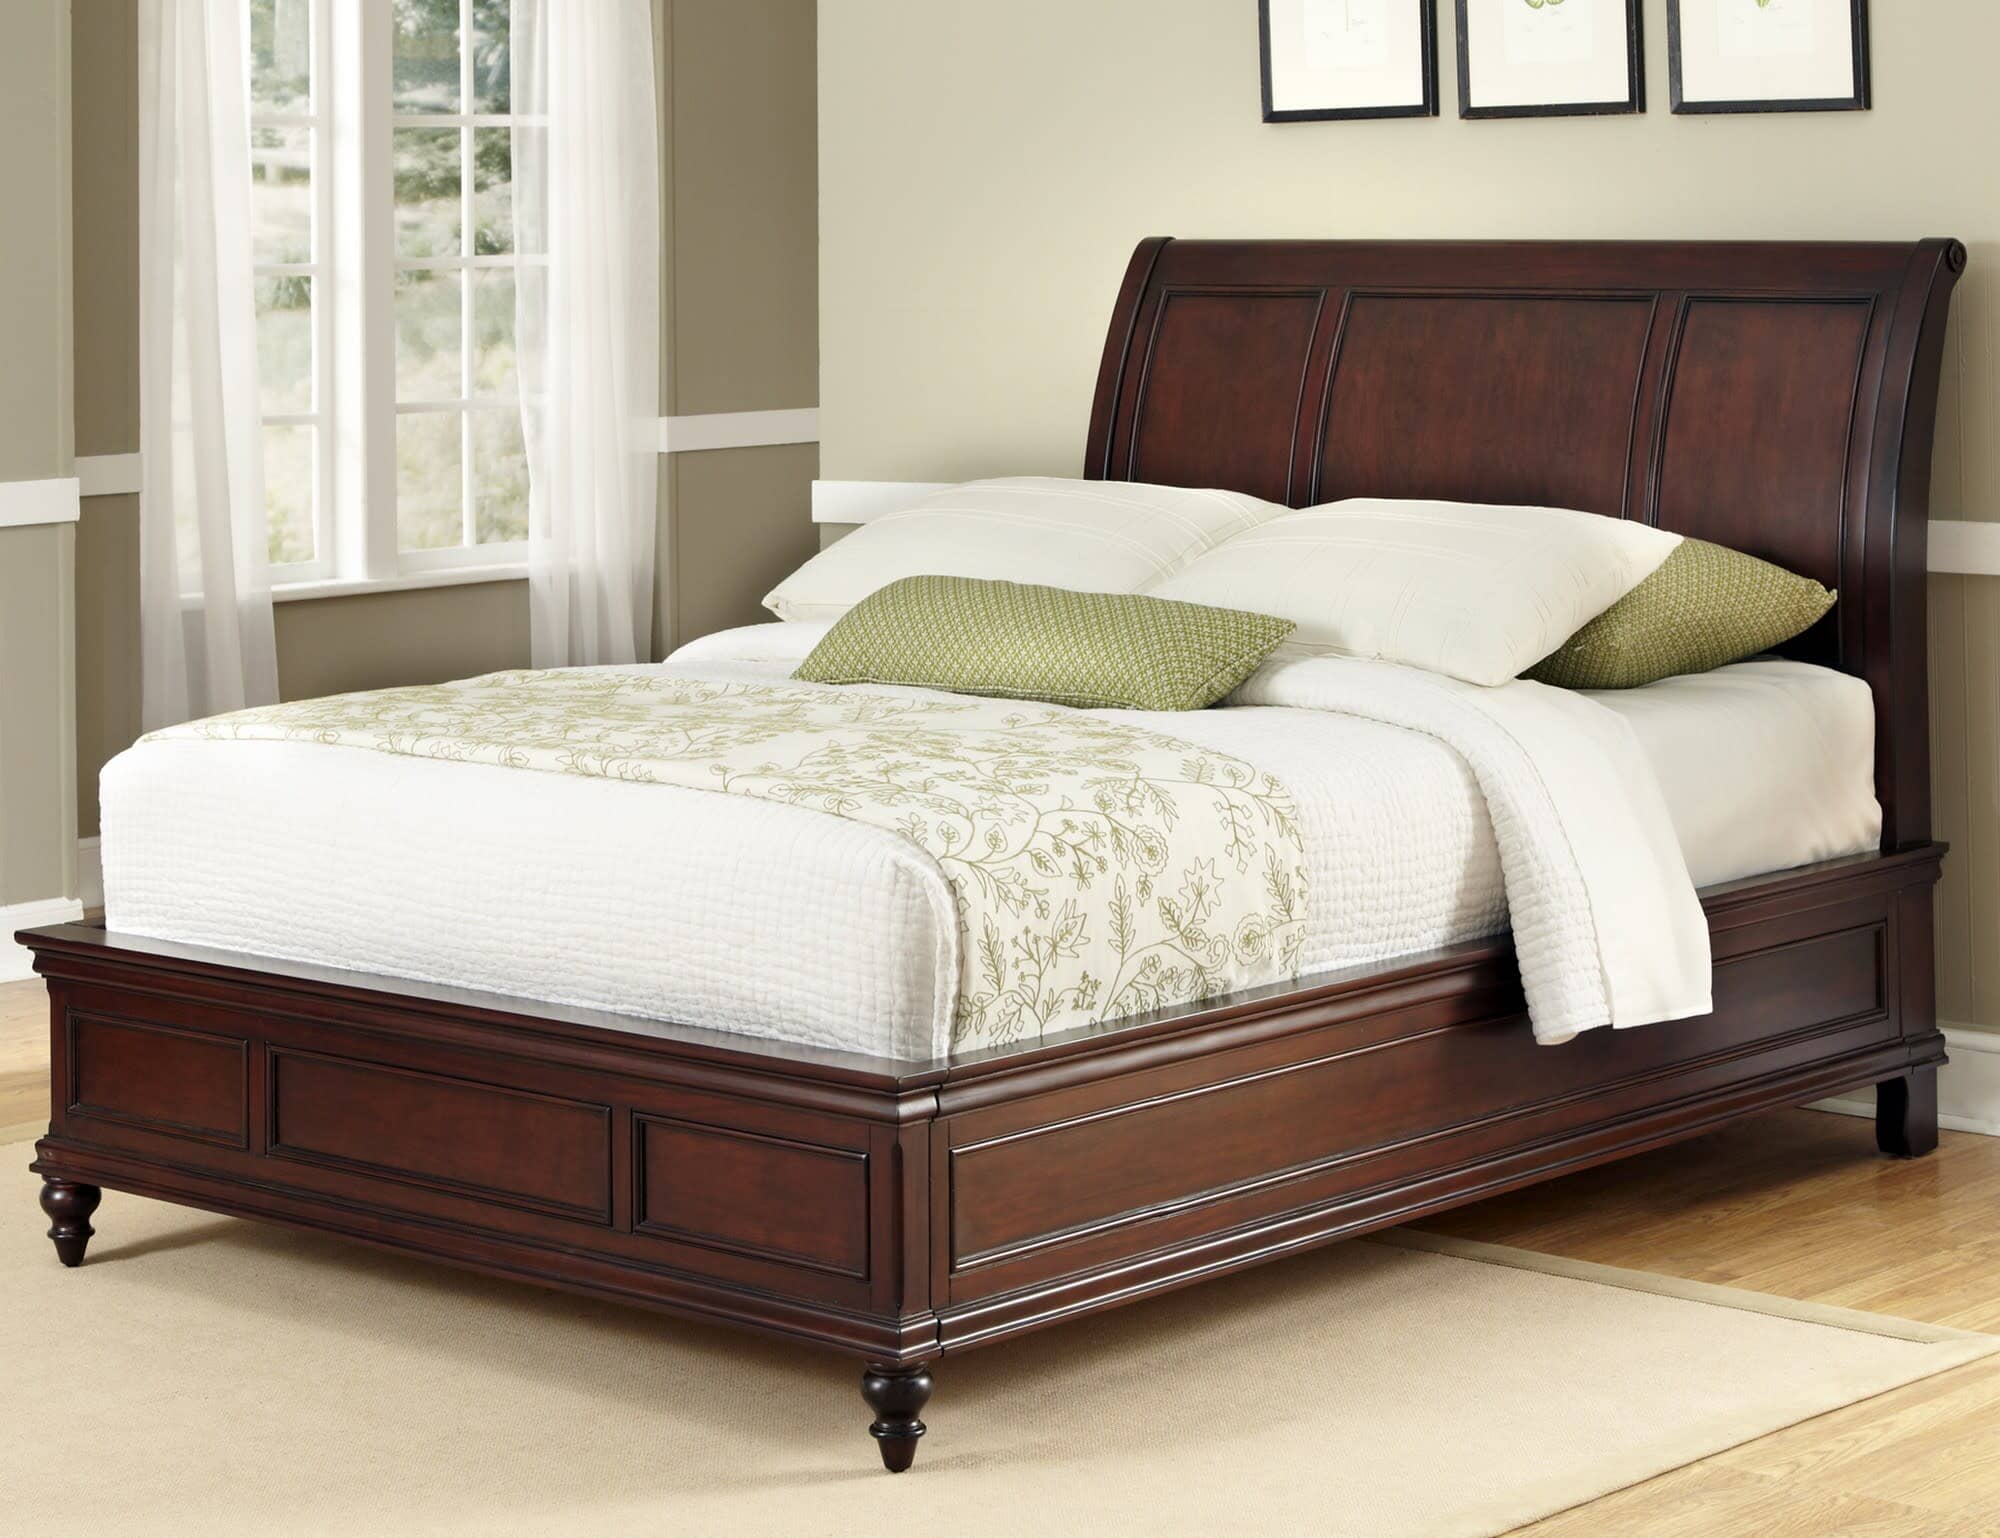 Traditional King Bed By Lafayette King Bed Lafayette